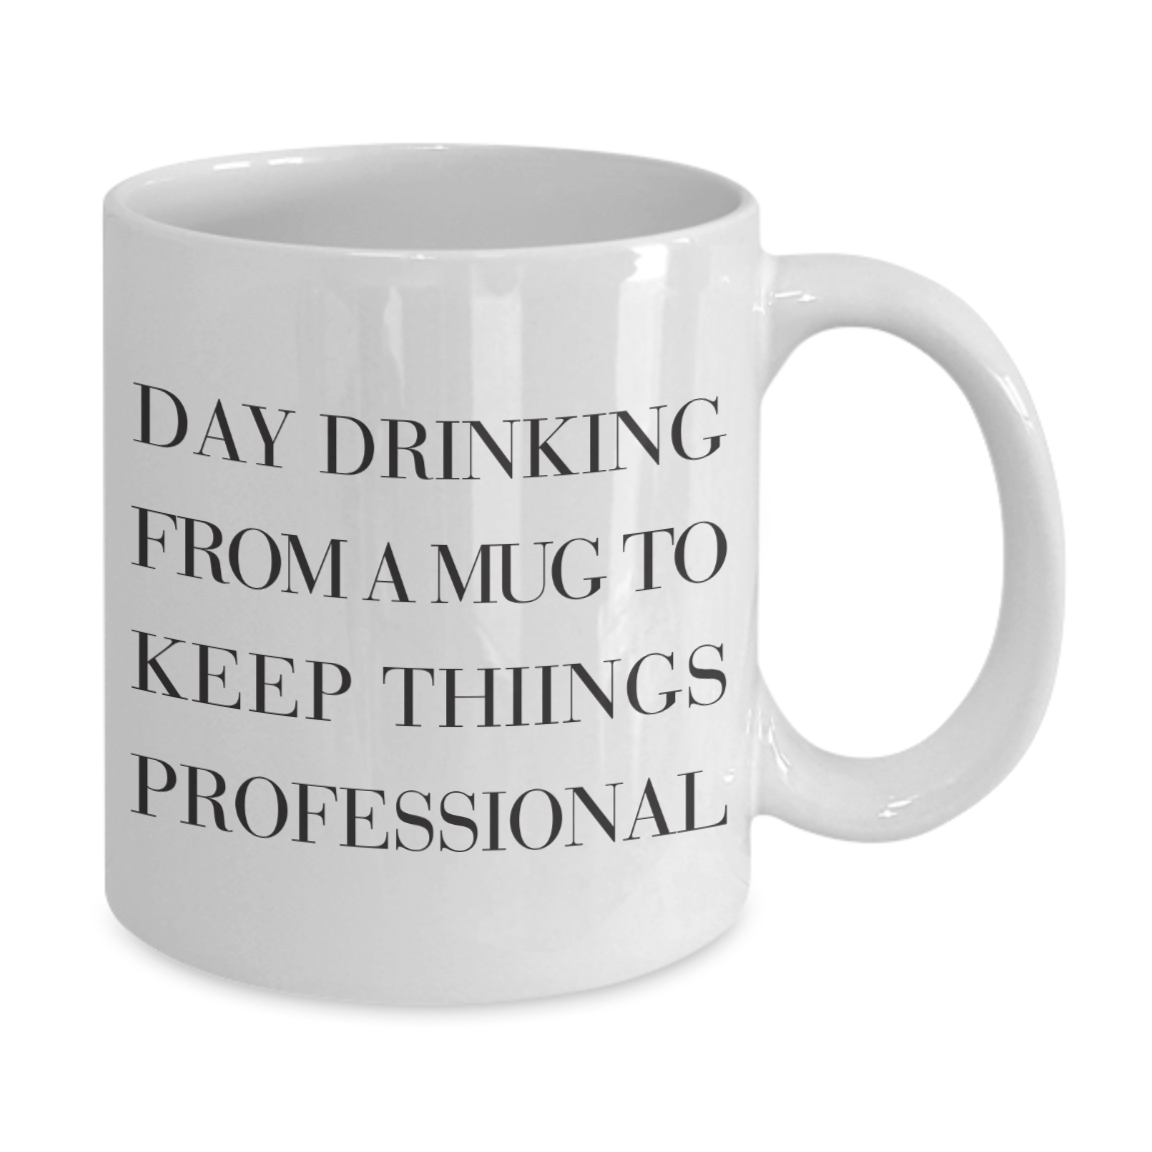 Day Drinking - Funny Quotes Coffee Mug